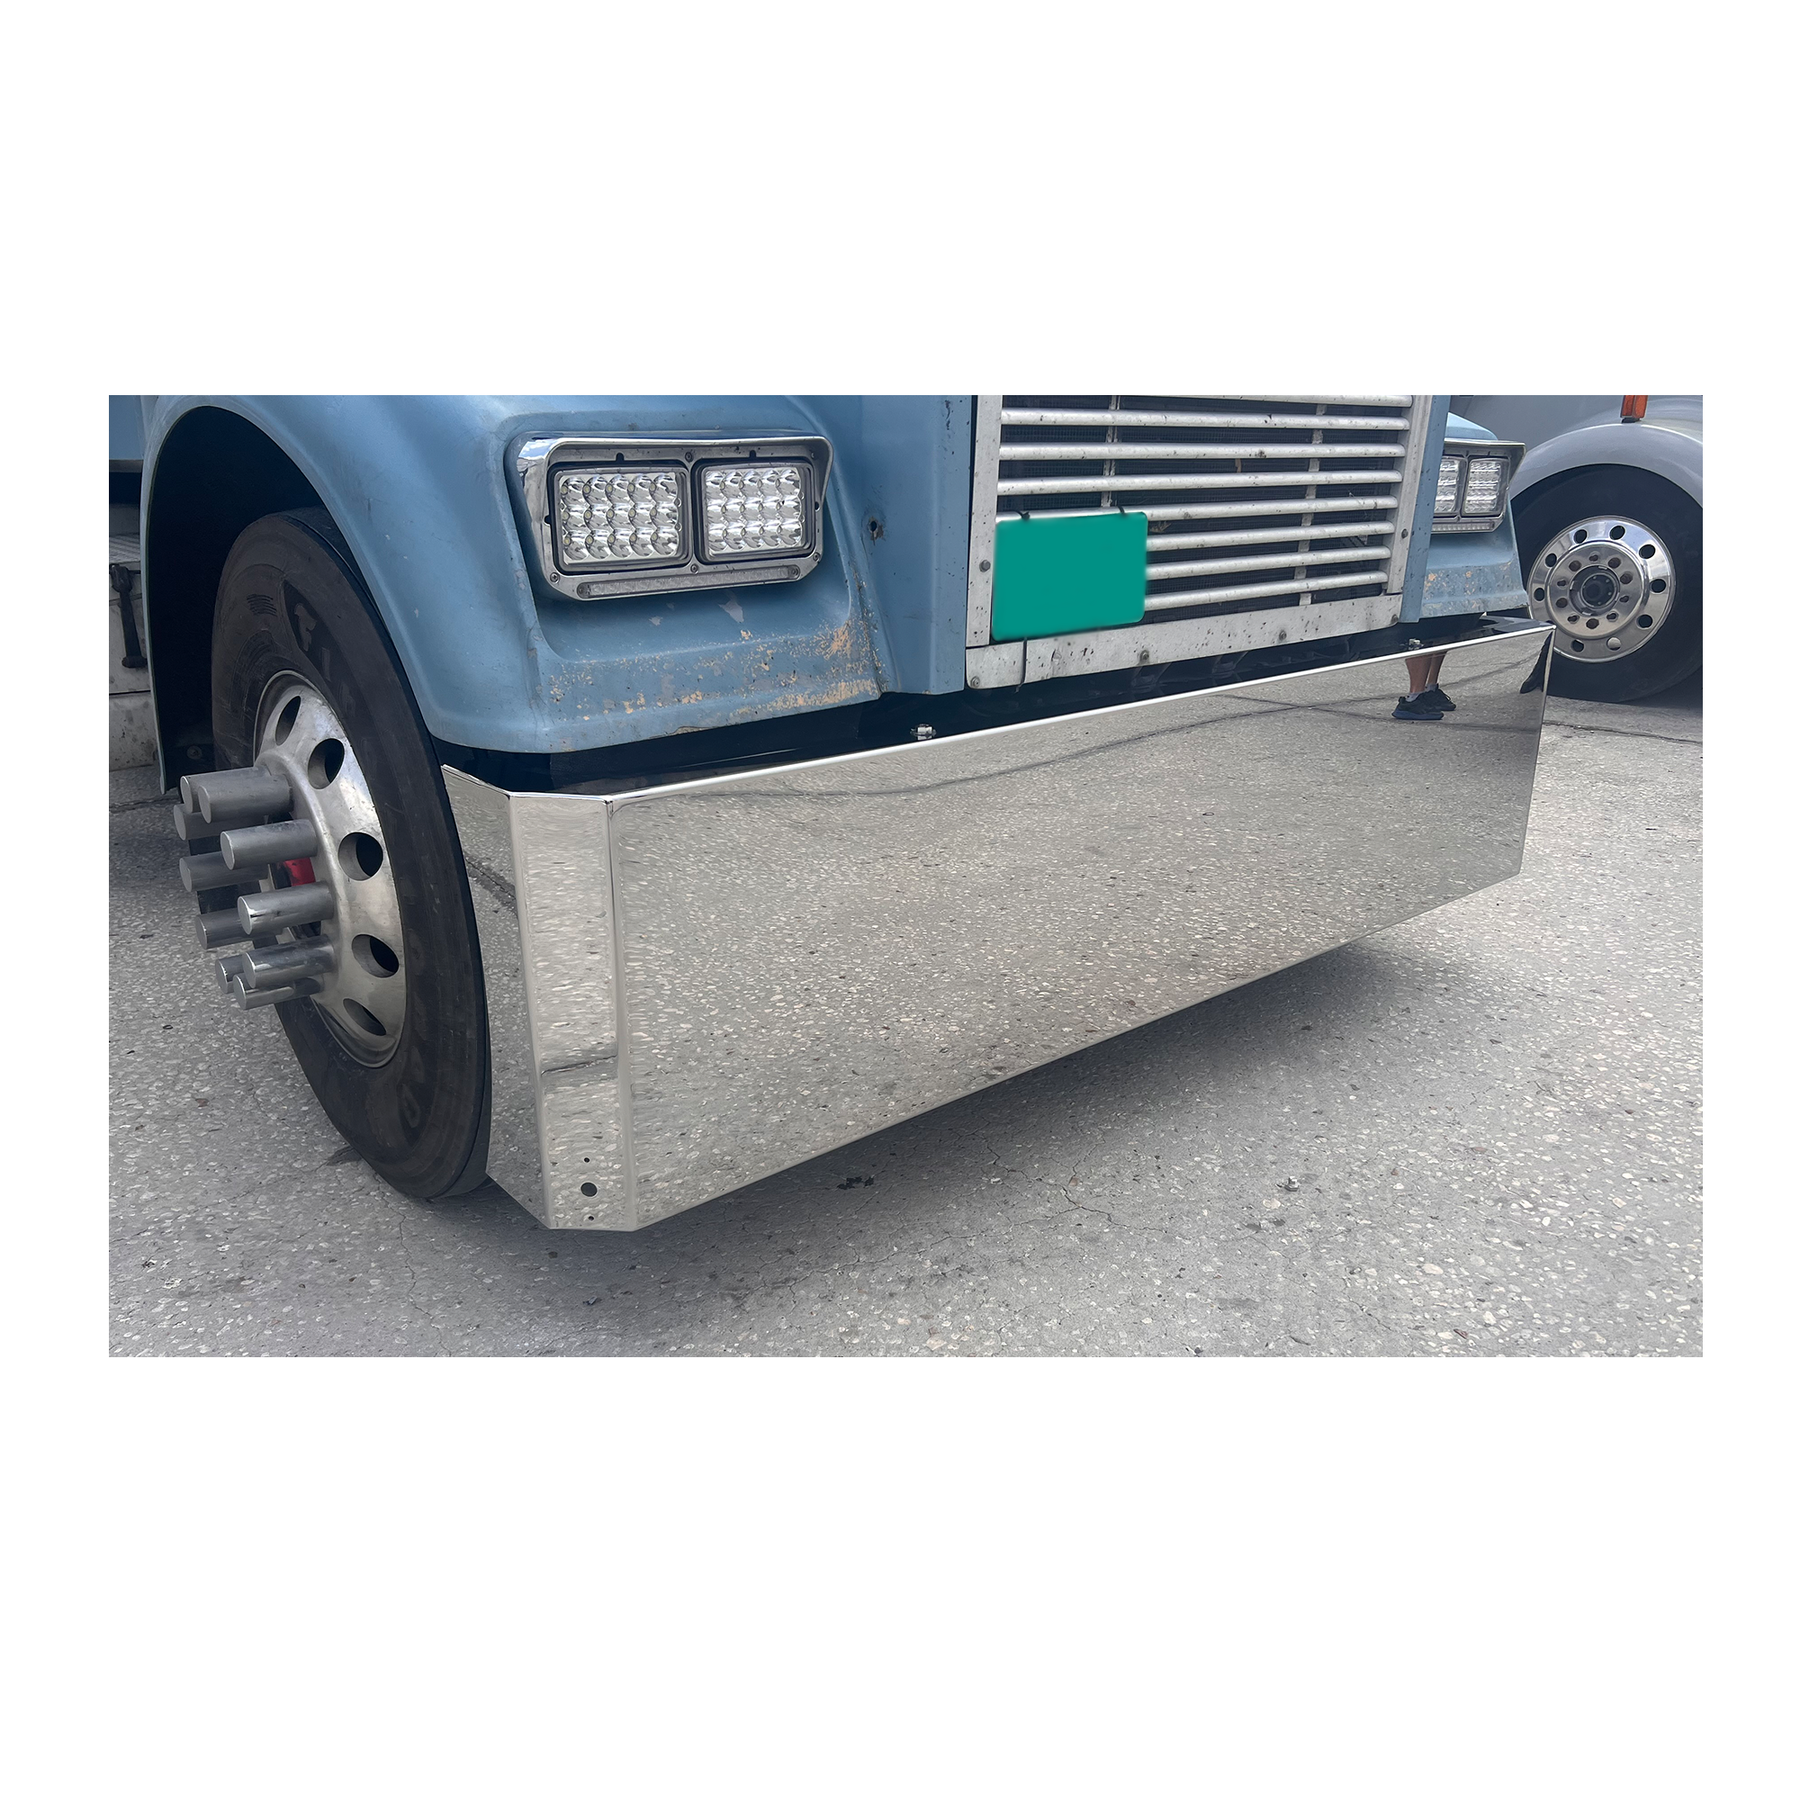 Freightliner Classic Steynless Steel Buzzard Bumper W/ 8 Inch Ends, Blind Mount & Mounting Plates For Freighliner By Floridas Finest Customs Works, Mirror Finish Made In USA